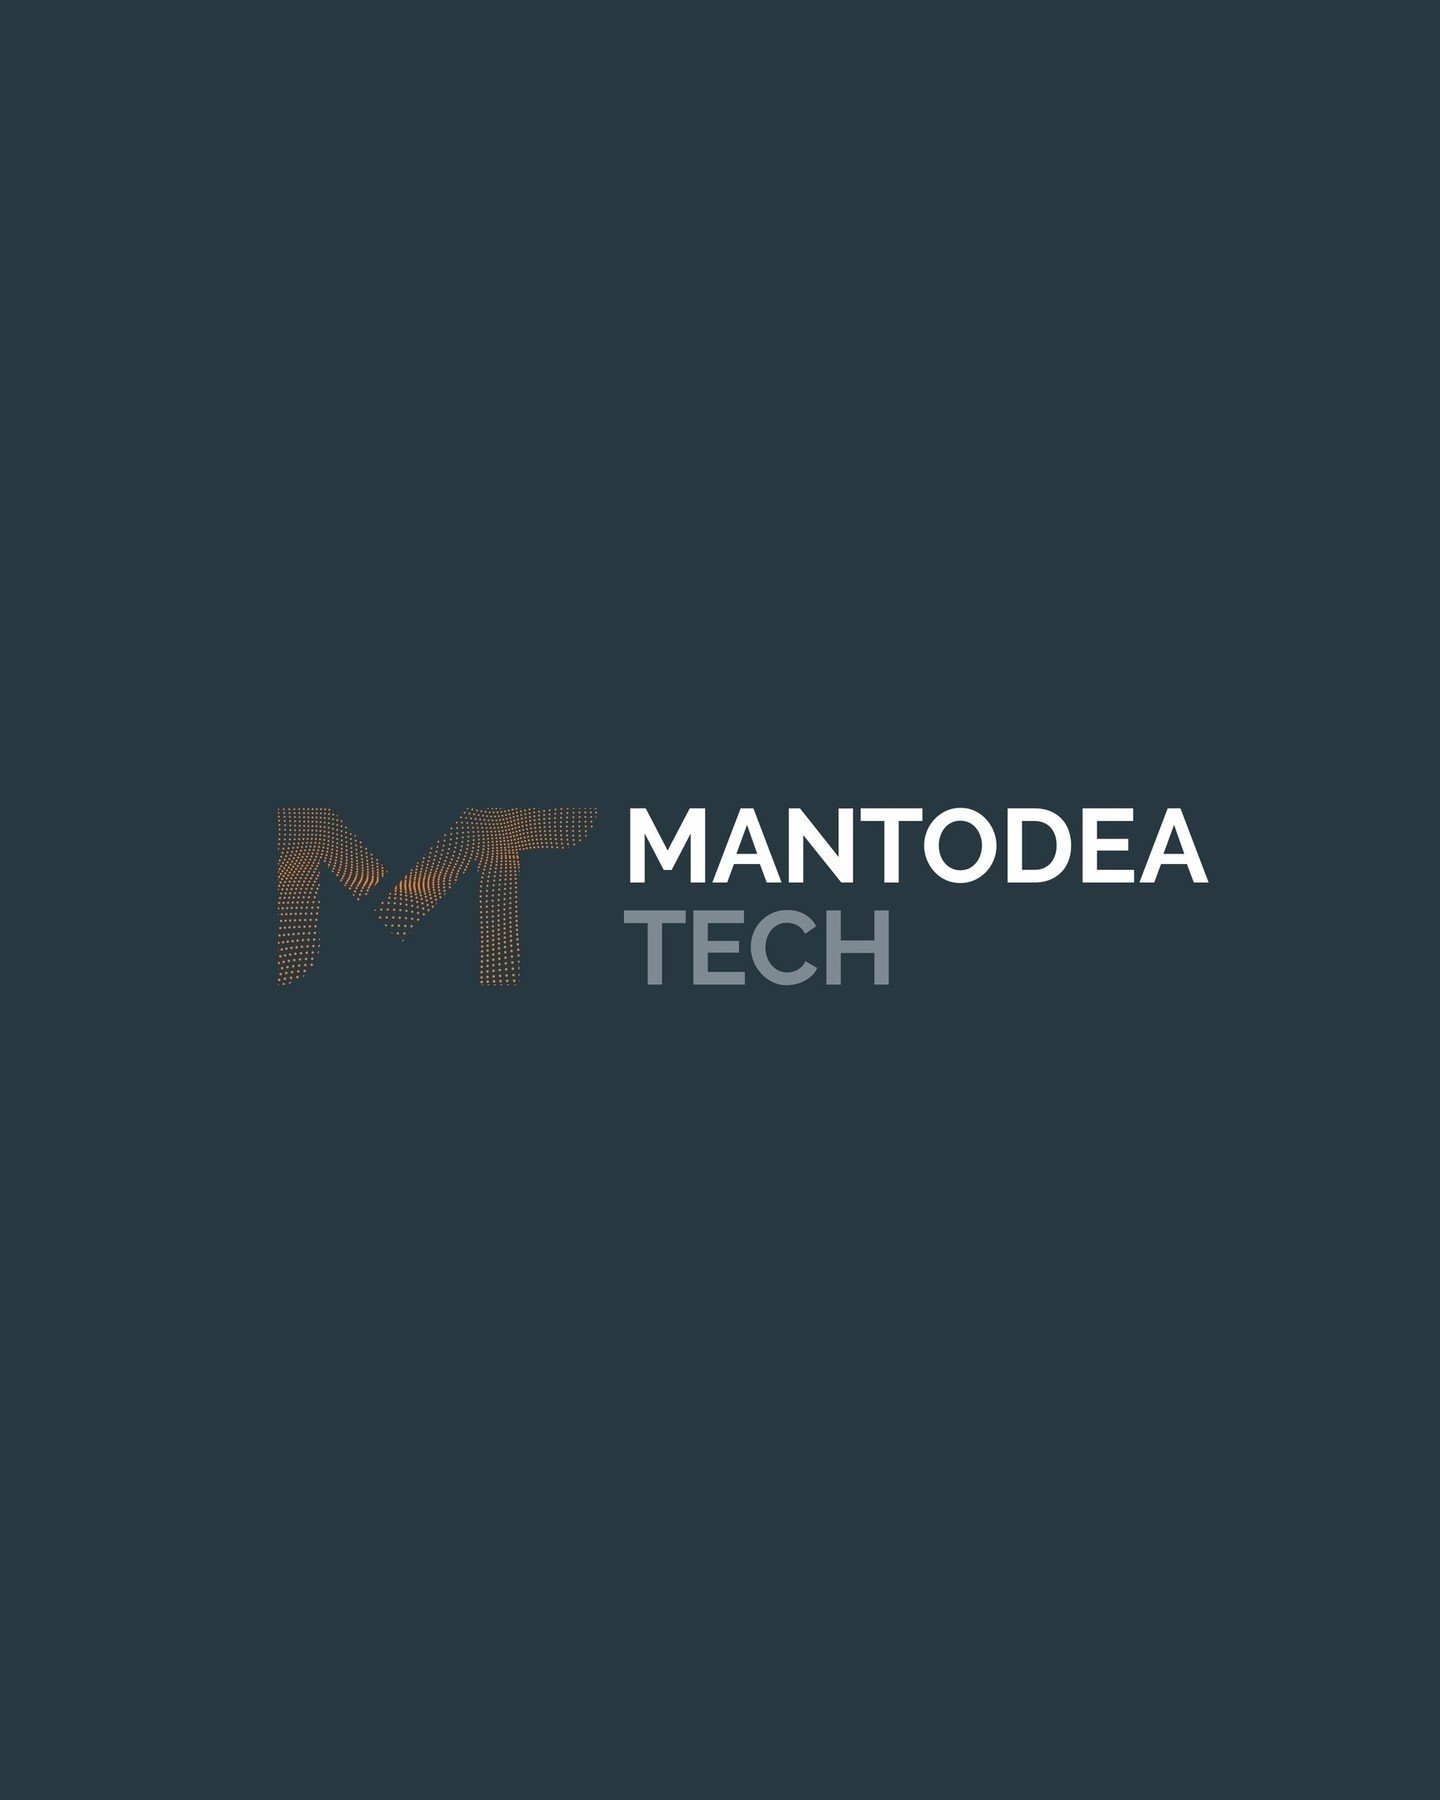 Drumroll, please! 🥁 Introducing the stunning new logo for our esteemed client, Mantodea Tech! ⭐️ Designed with precision and purpose, this emblem represents our shared commitment to revolutionizing player safety in sports. Stay tuned as we continue 